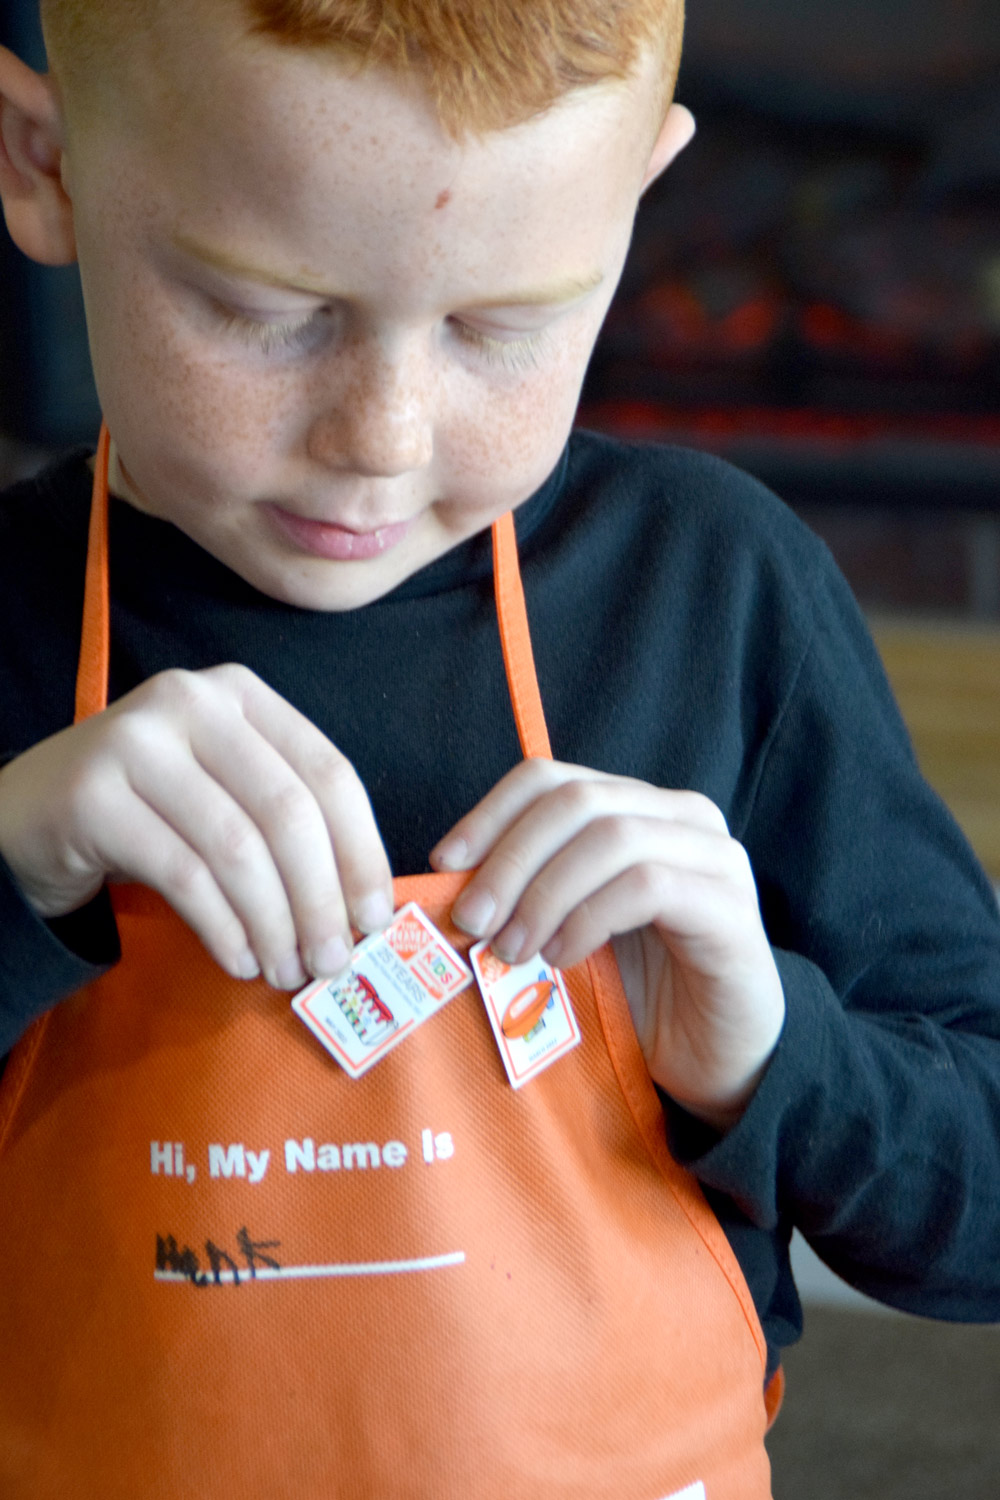 A boy pinning a Picket Fence Planter workshops planter to an orange Home Depot apron.